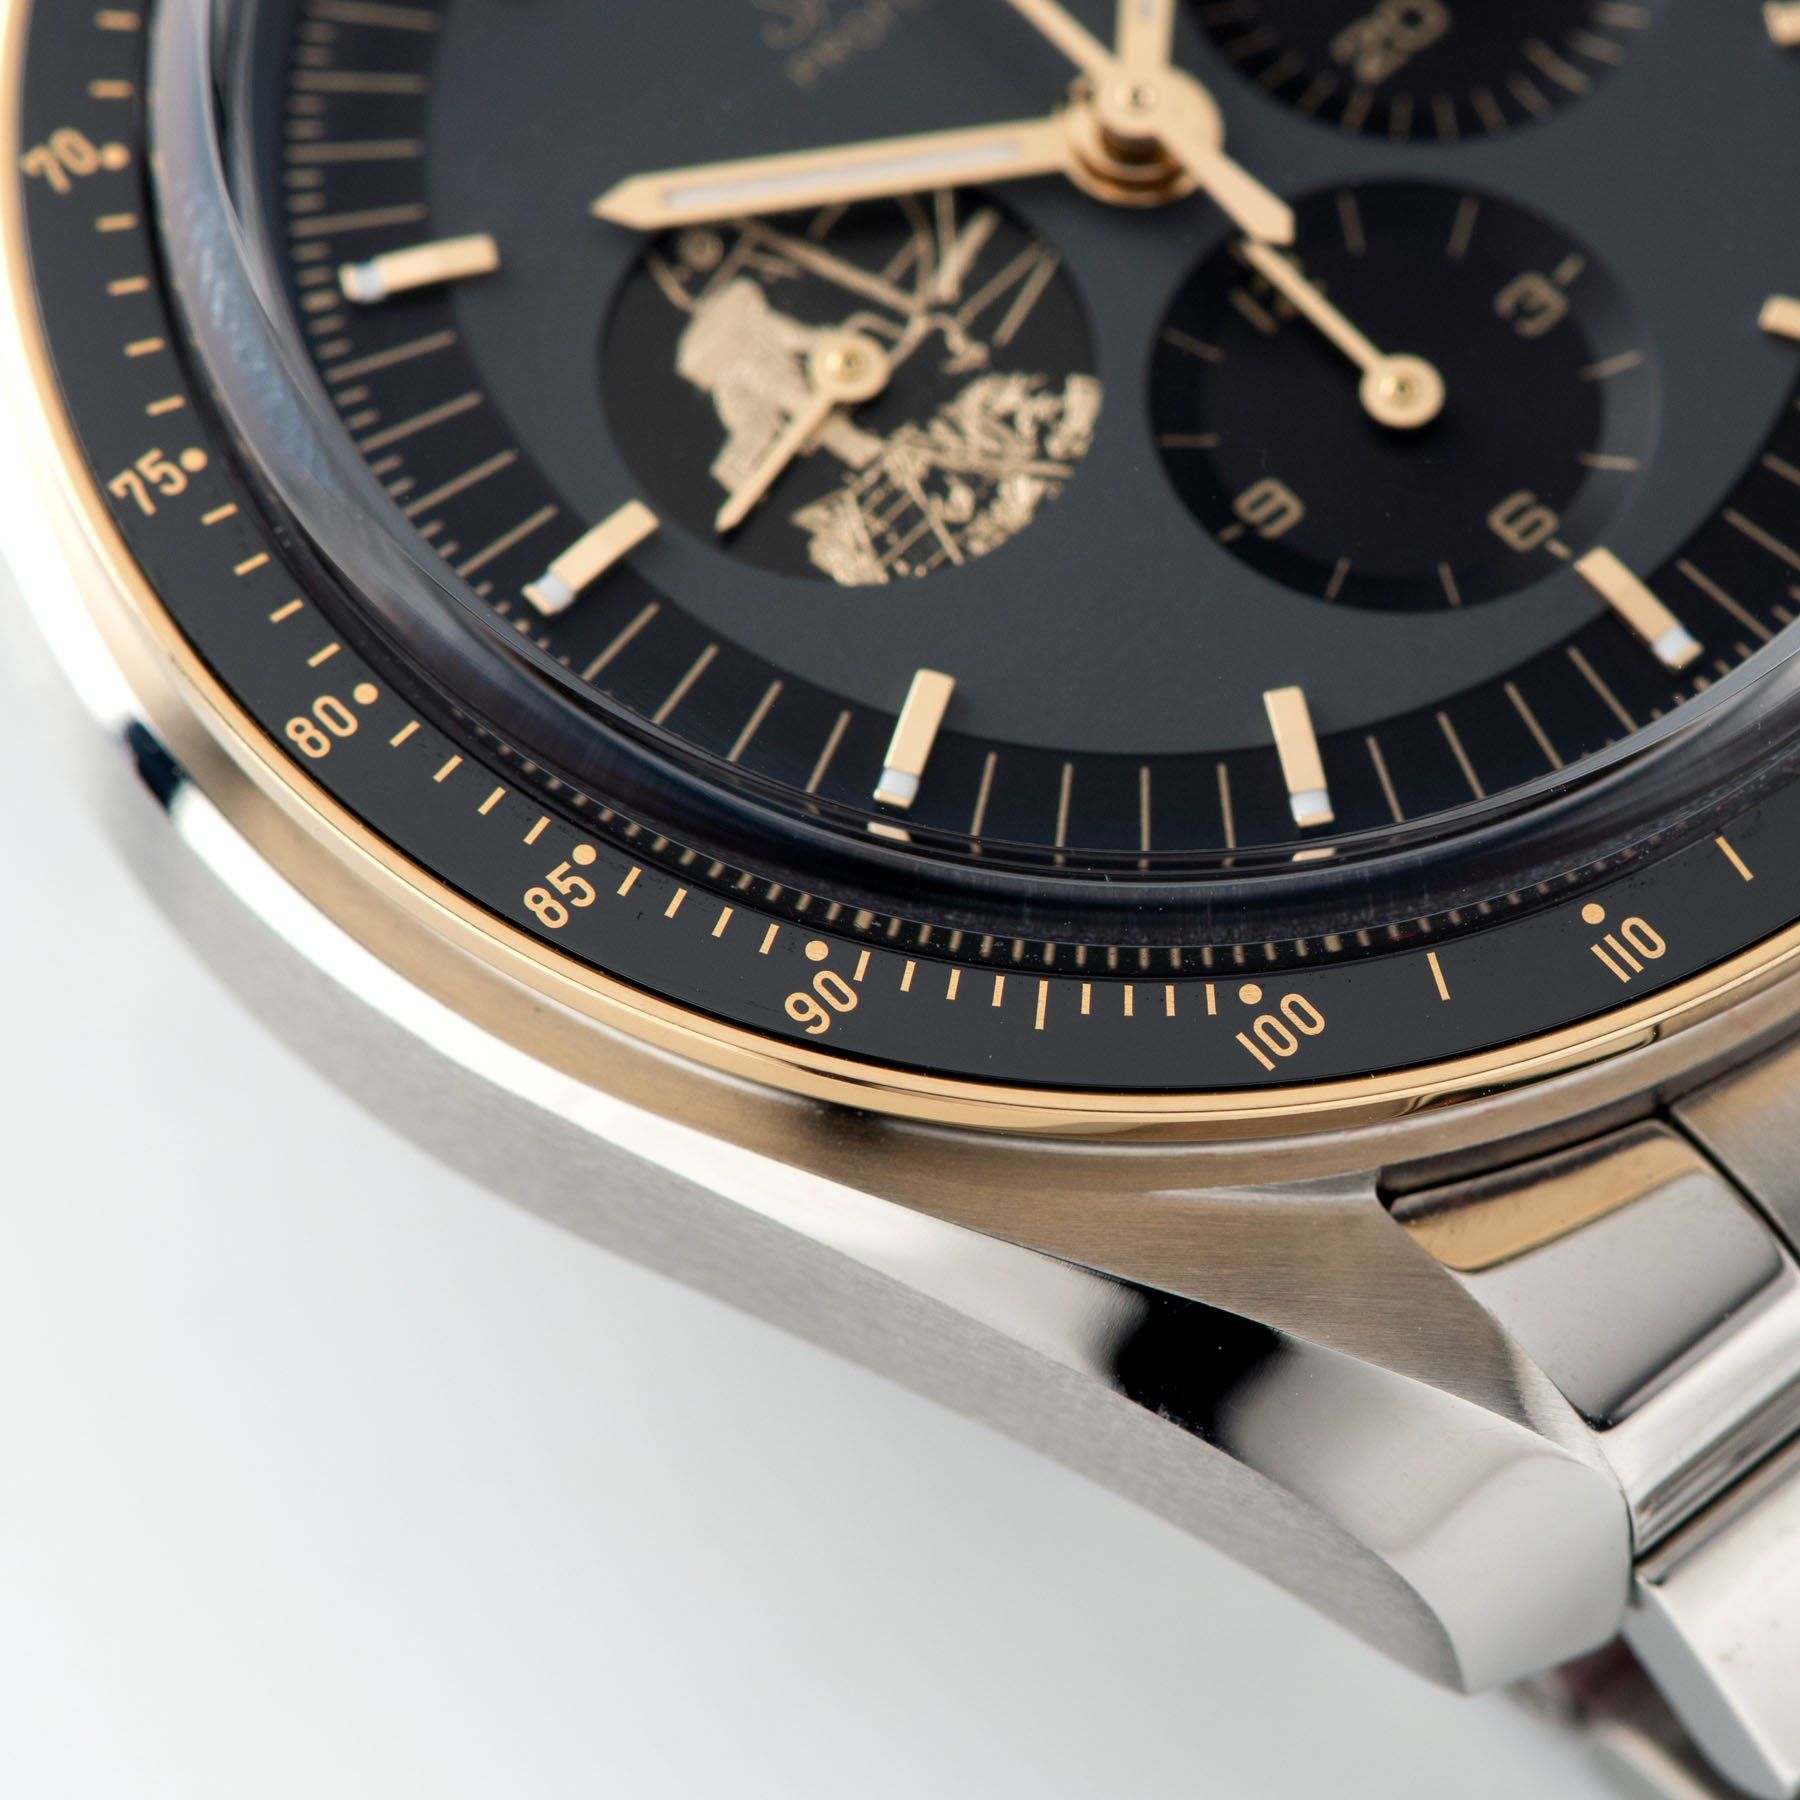 Omega Speedmaster Apollo 11 50th Anniversary Limited Edition with Moonshine gold bezel